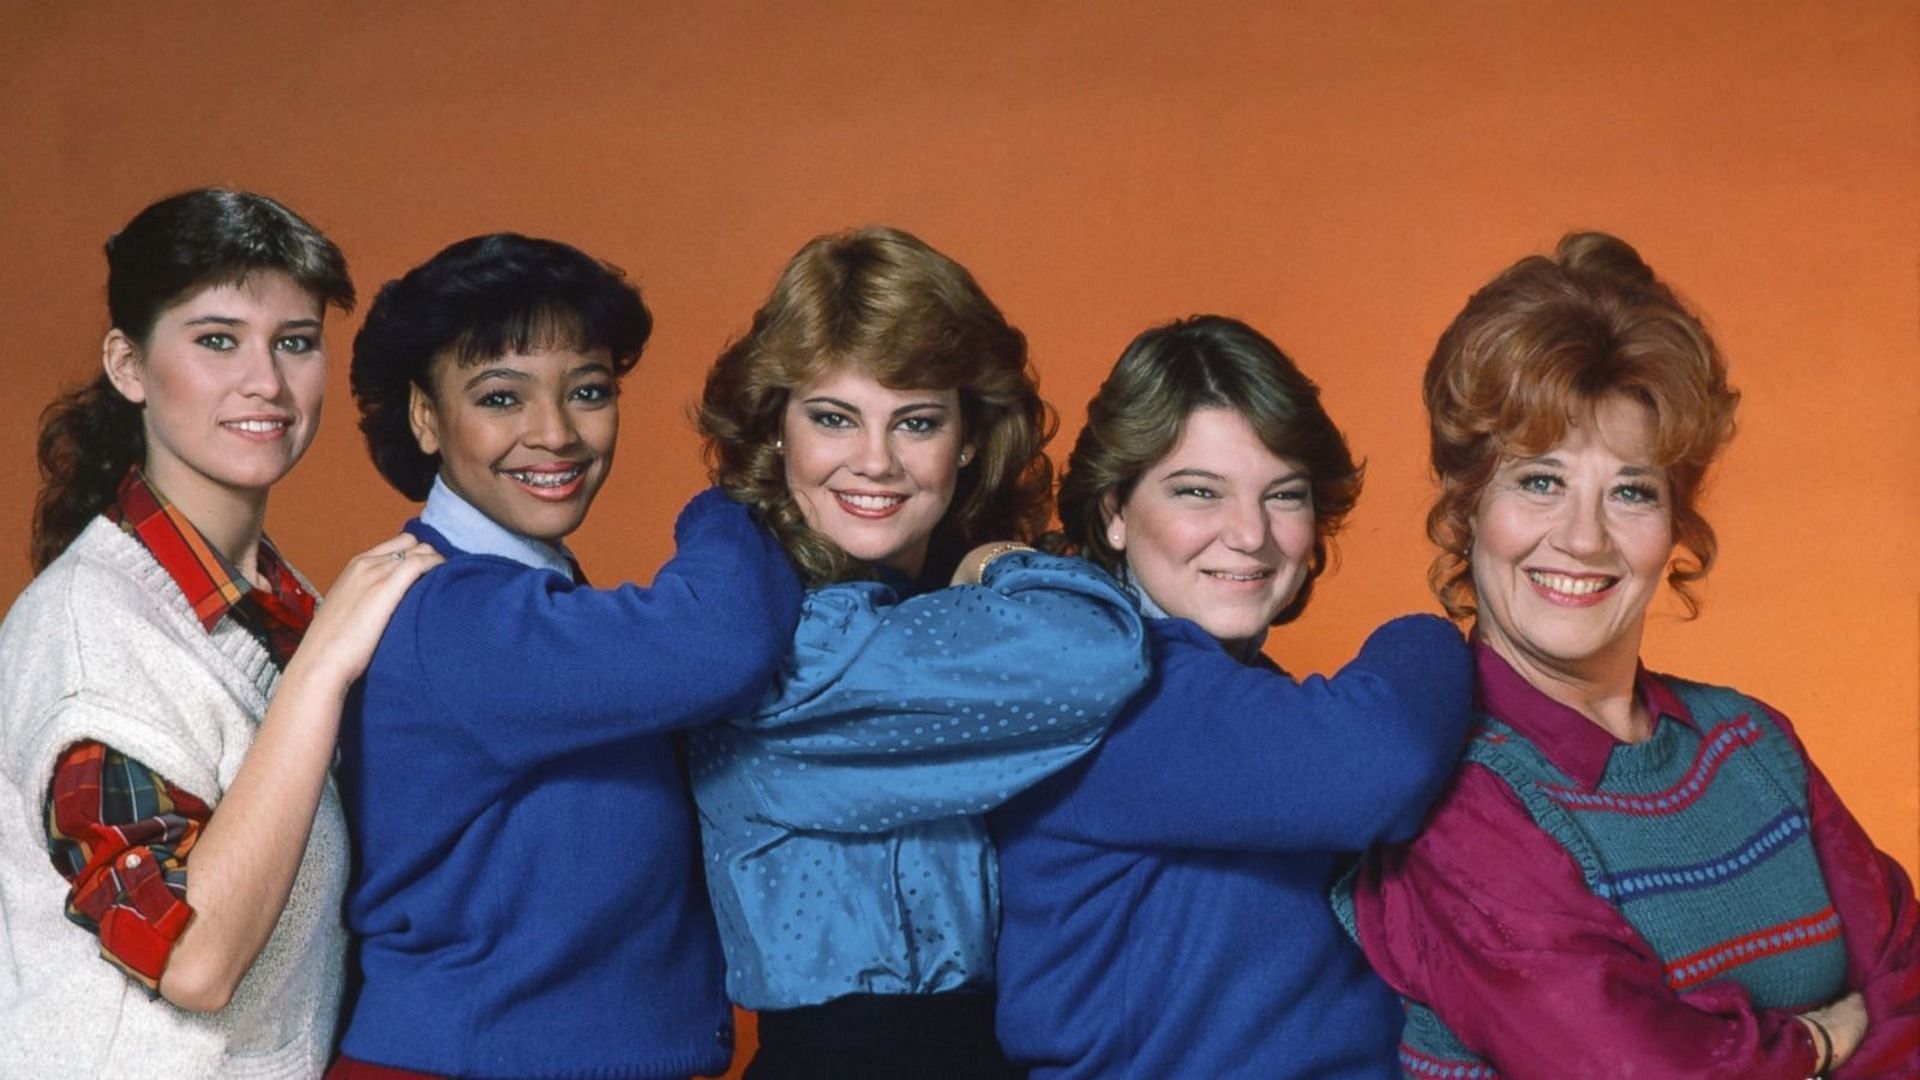 A picture of the cast from back in the day (Image via NBC)